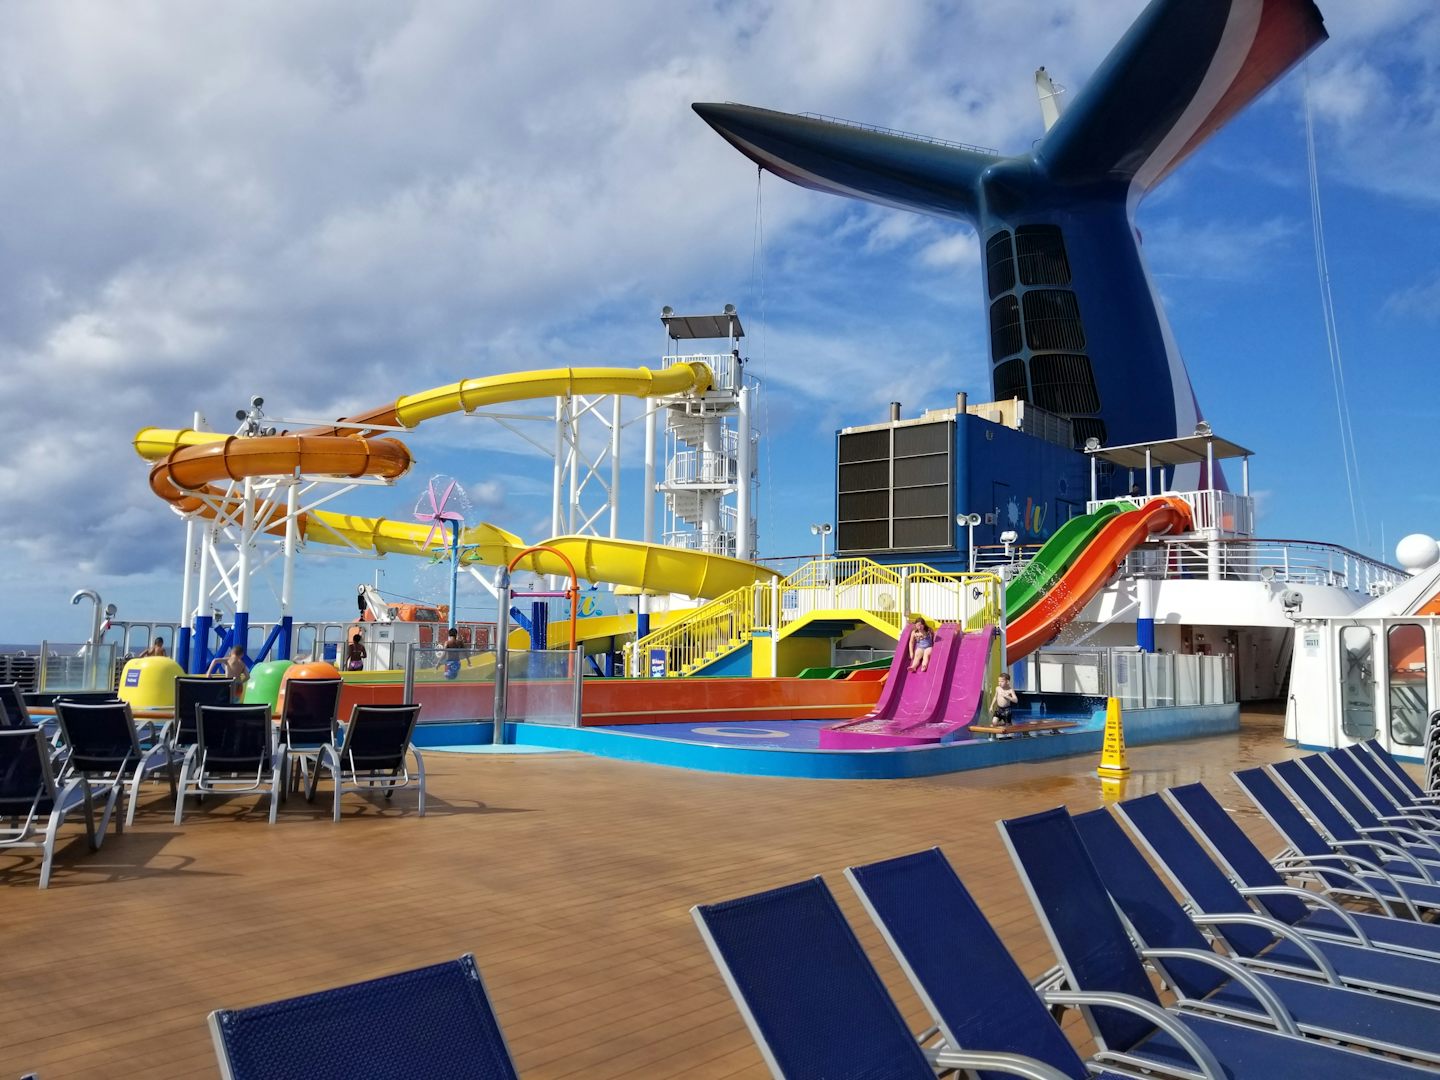 Water park on ship. Kids had a great time